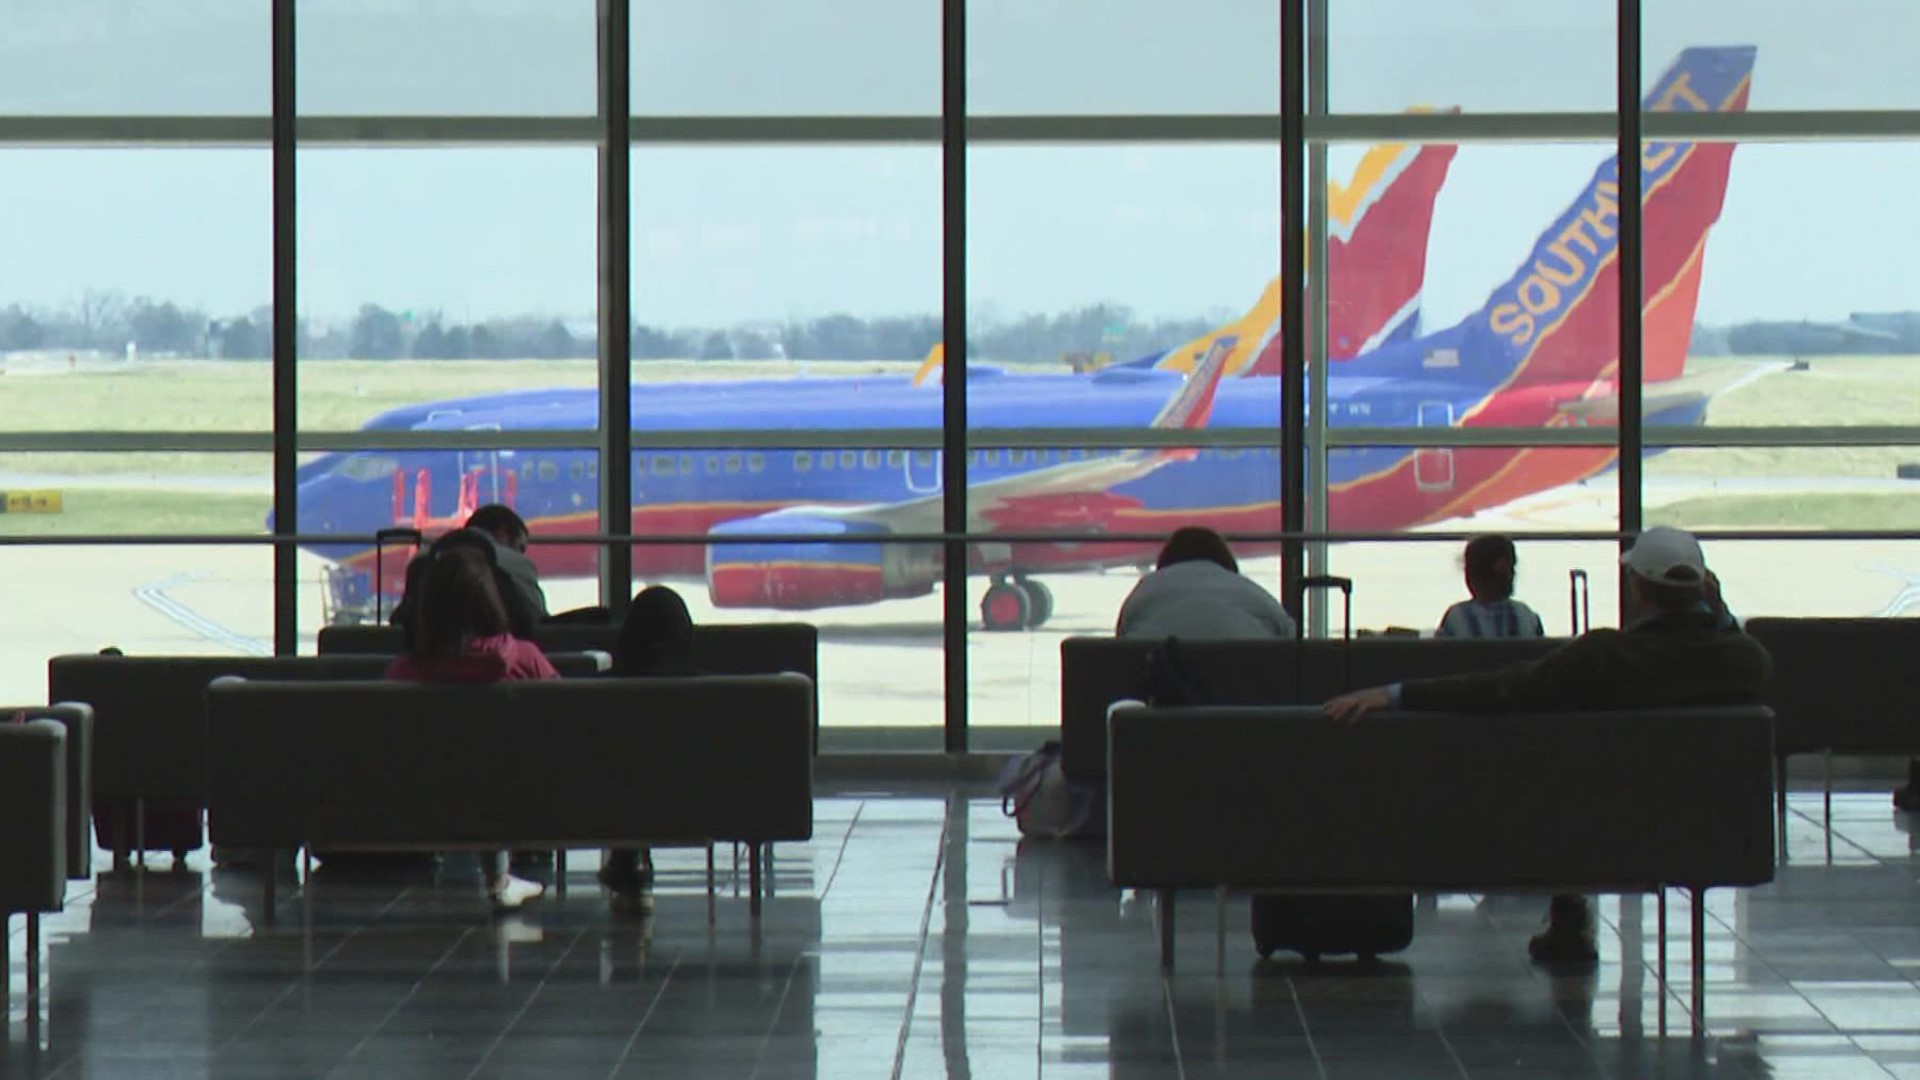 Allison Gormly has the latest on what you should do if your flight is cancelled.